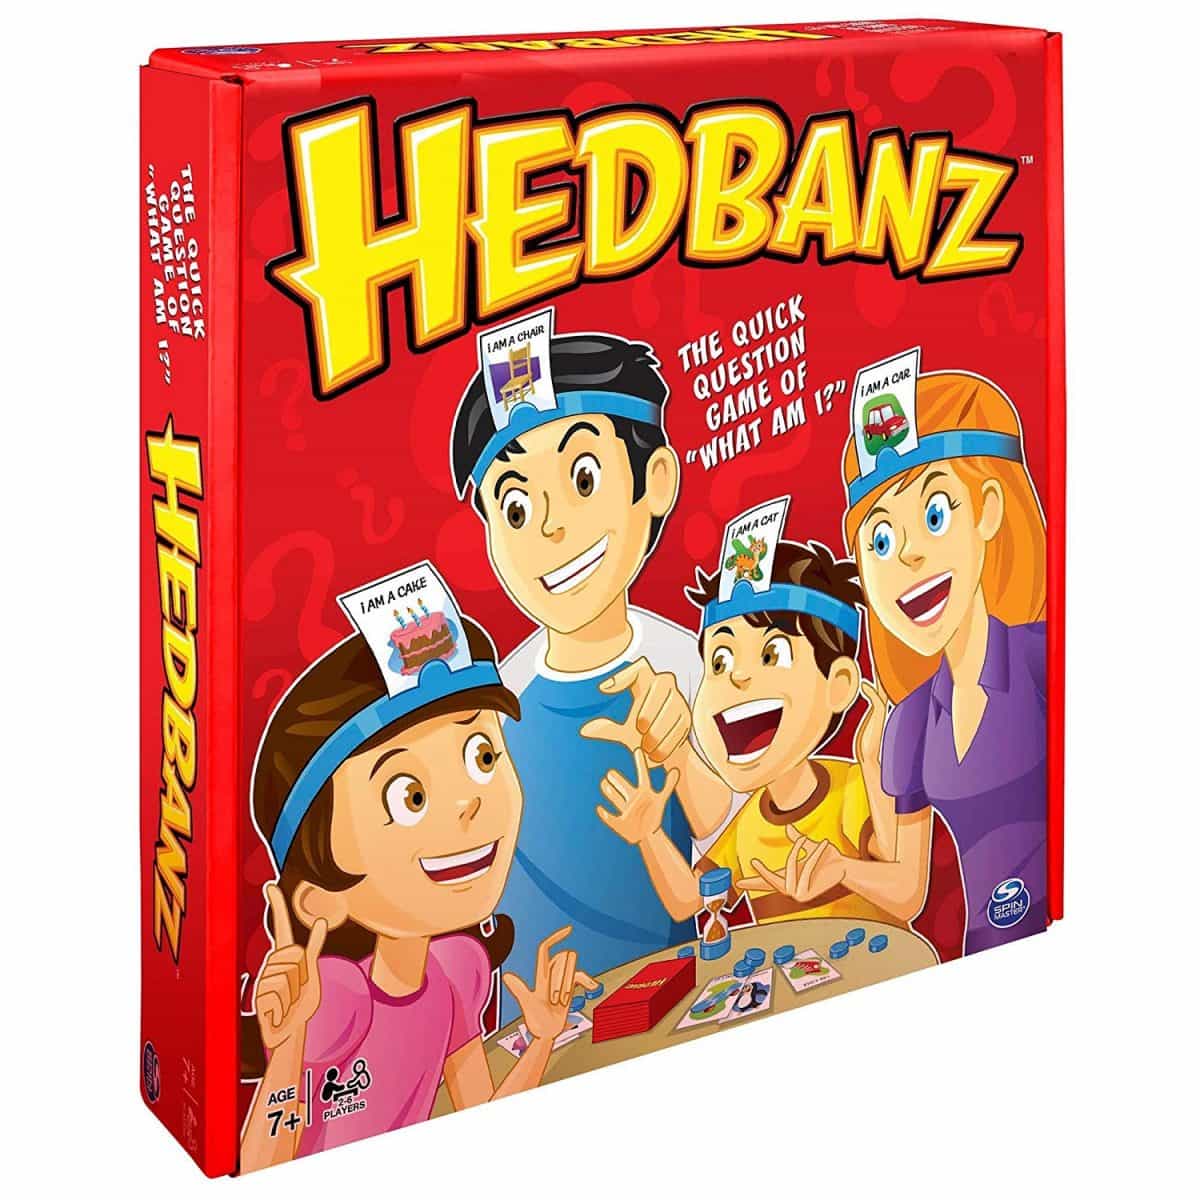 X Board Games You Need For Your Next Family Game Night